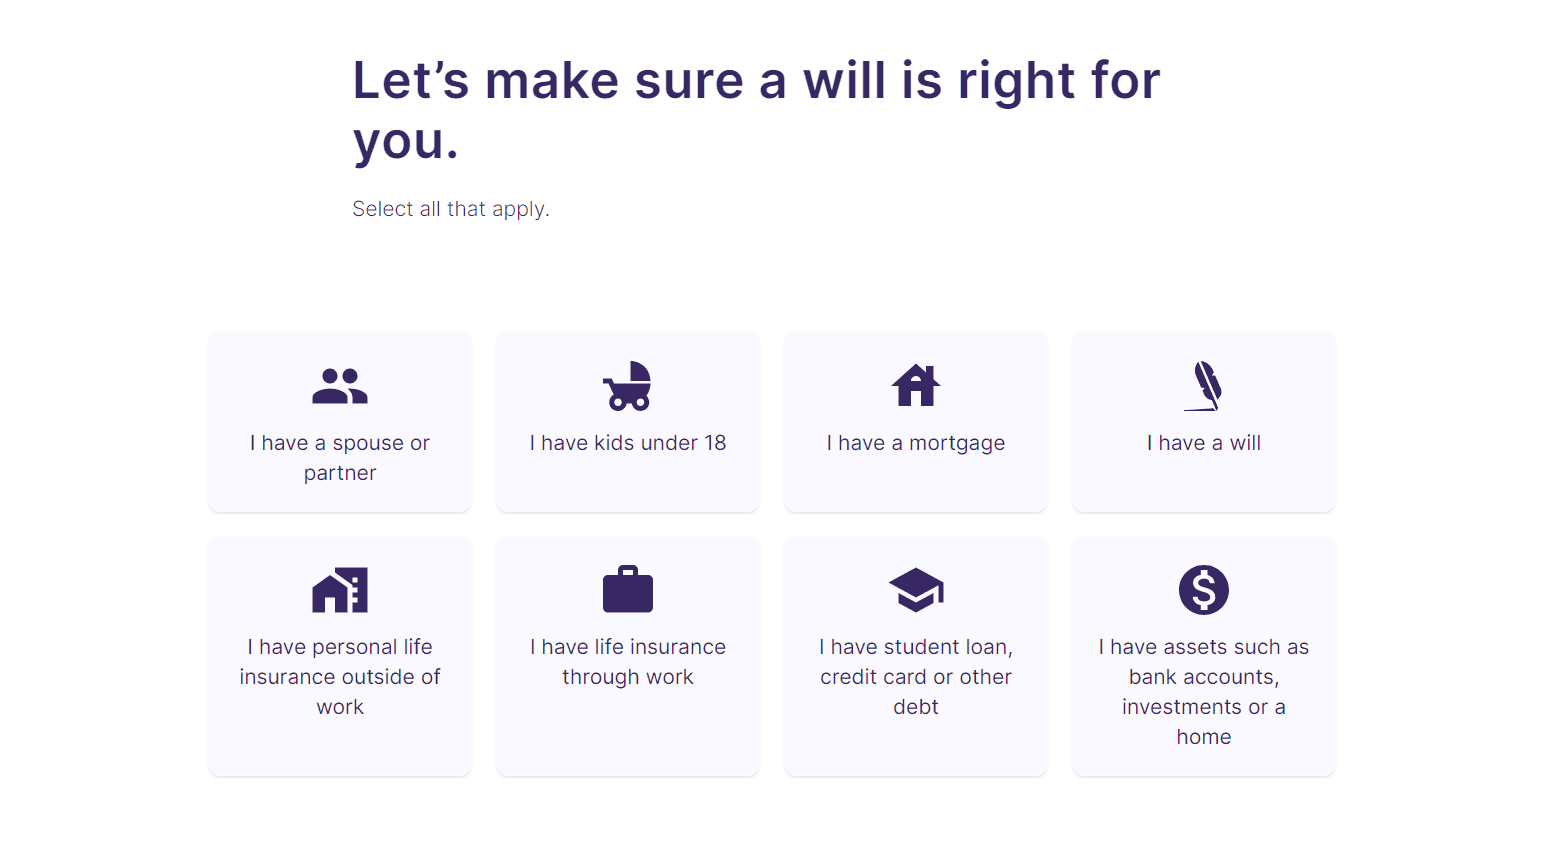 Fabric by Gerber Life offers a tool to help you make sure a will is right for you. Source: Fabric by Gerber Life